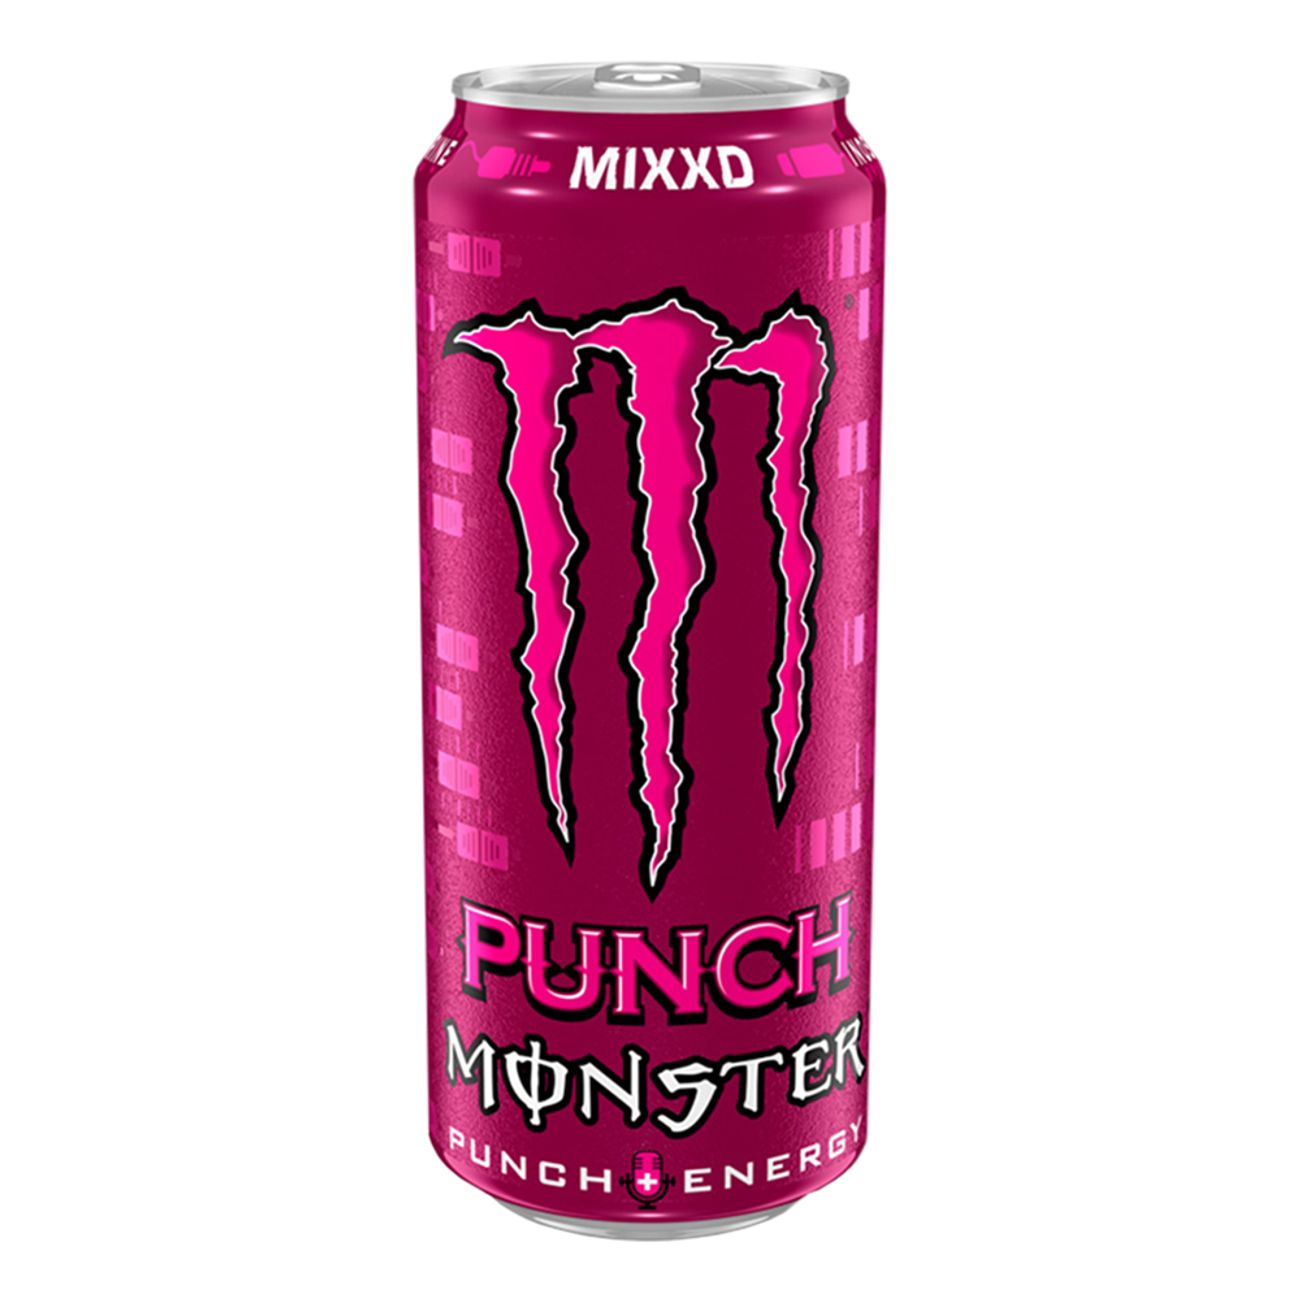 monster-energy-mixxd-punch-98937-1